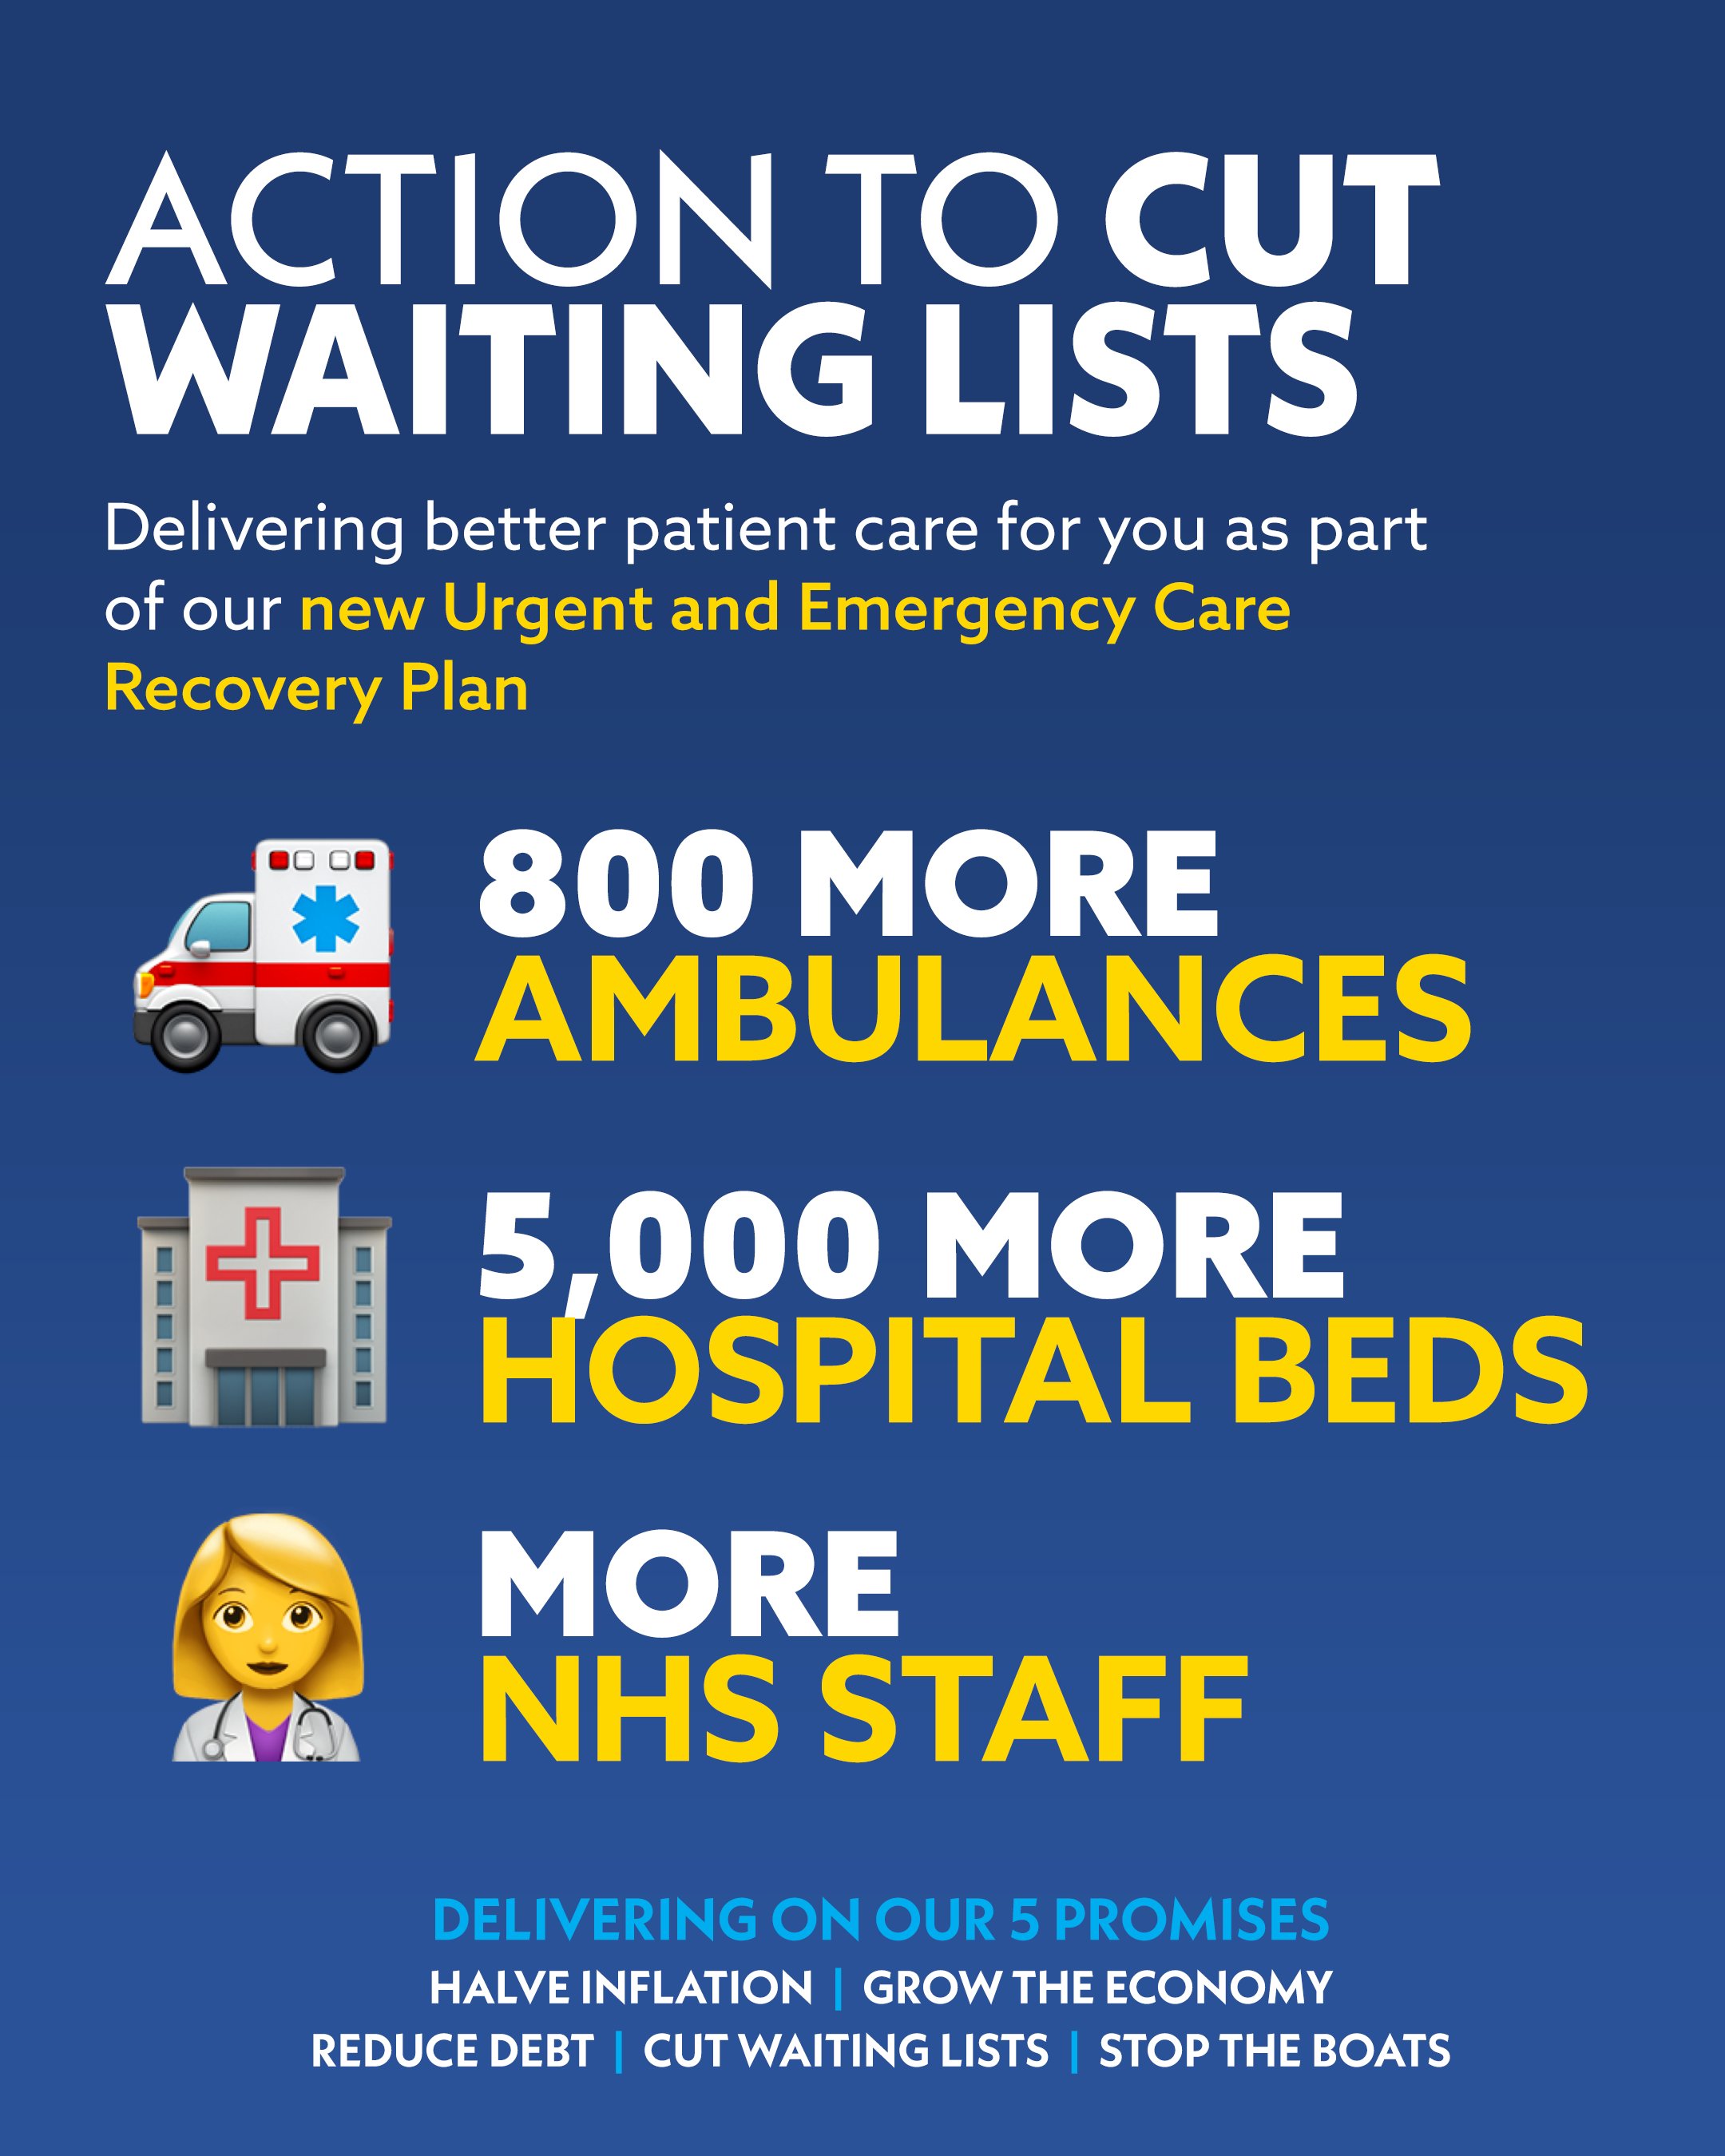 Rishi Sunak announces Urgent Care Recovery Plan to cut waiting lists with 800 more ambulances, 5,000 hospital beds and more NHS staff.